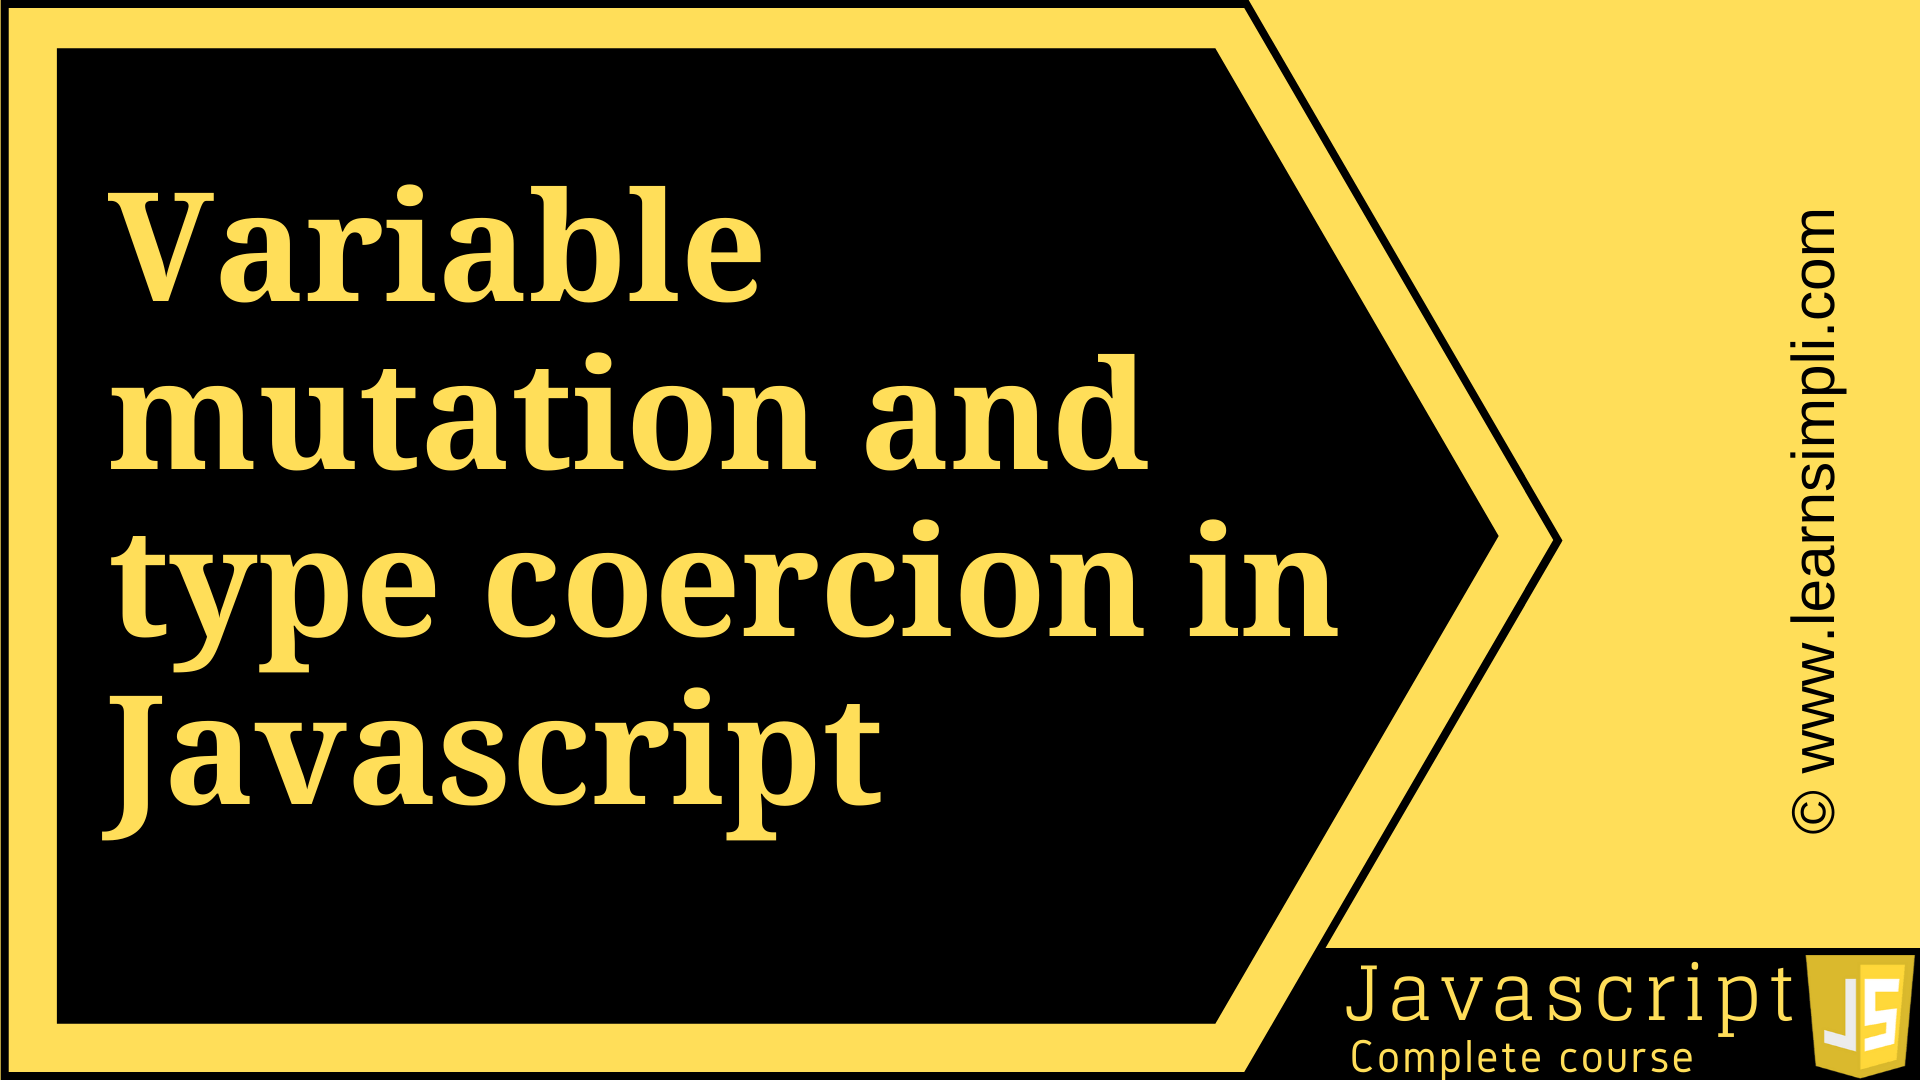 Variable mutation and type coercion in Javascript